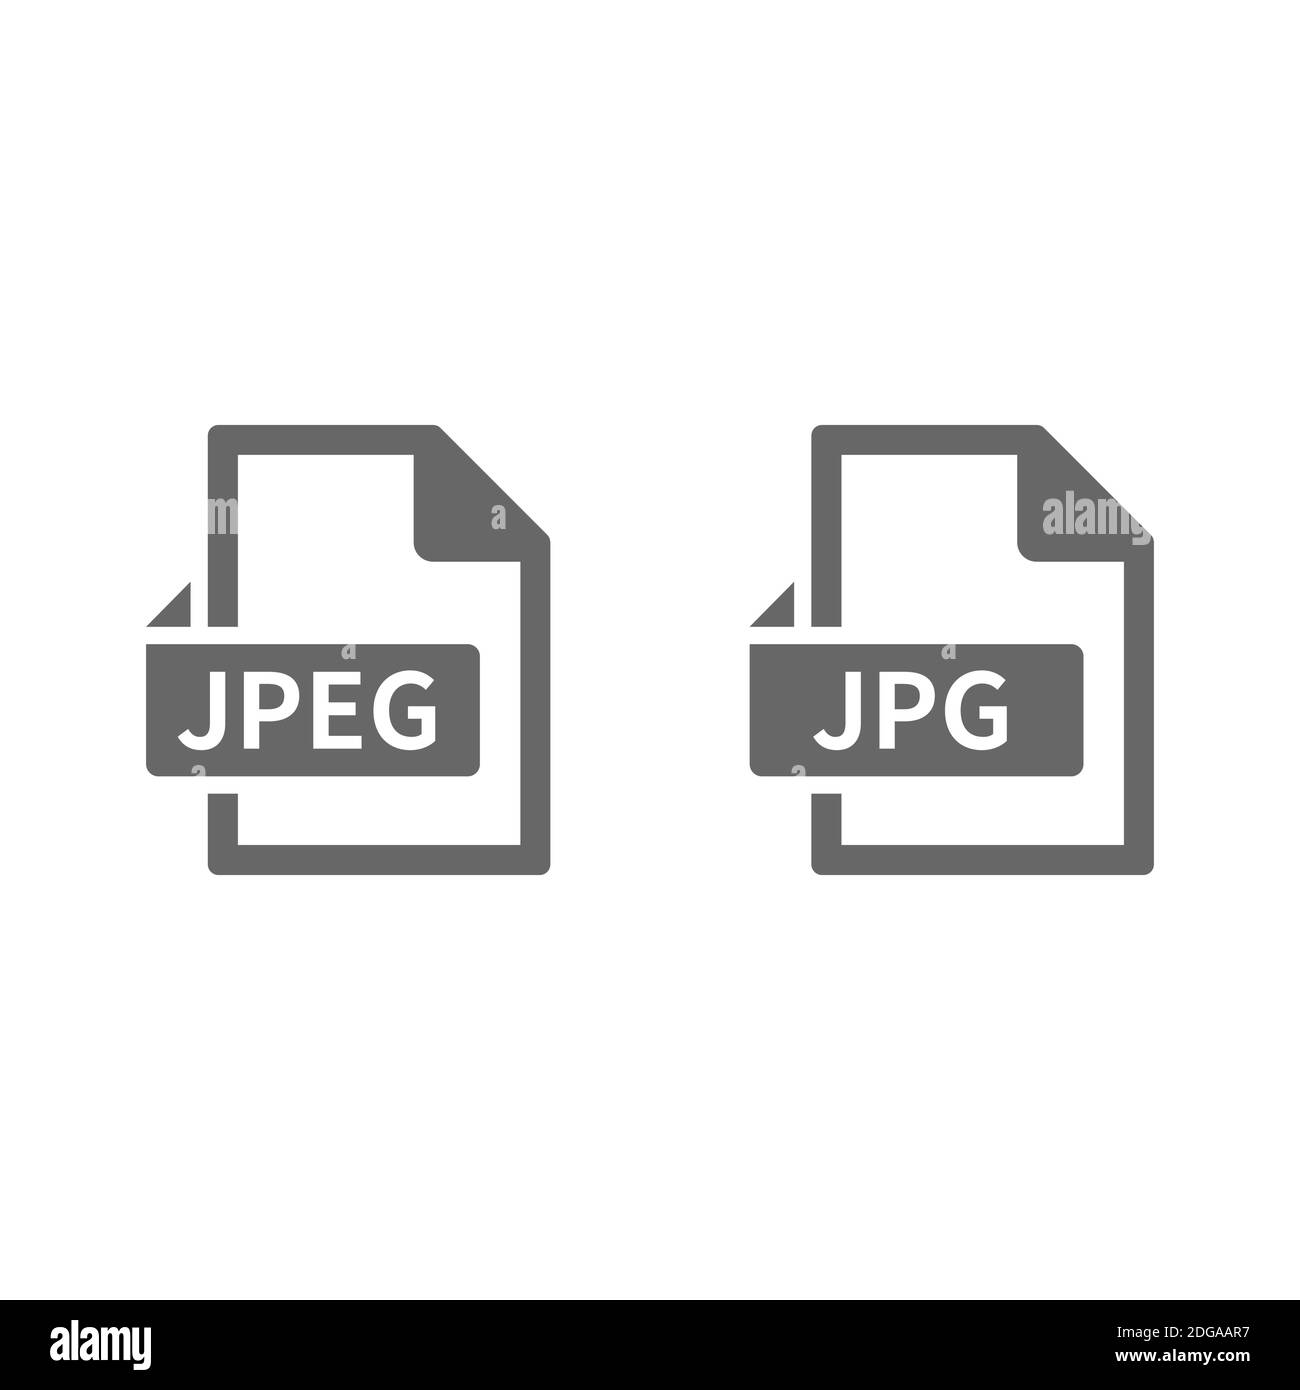 Jpeg and jpg button icon. File format black vector symbol. Stock Vector